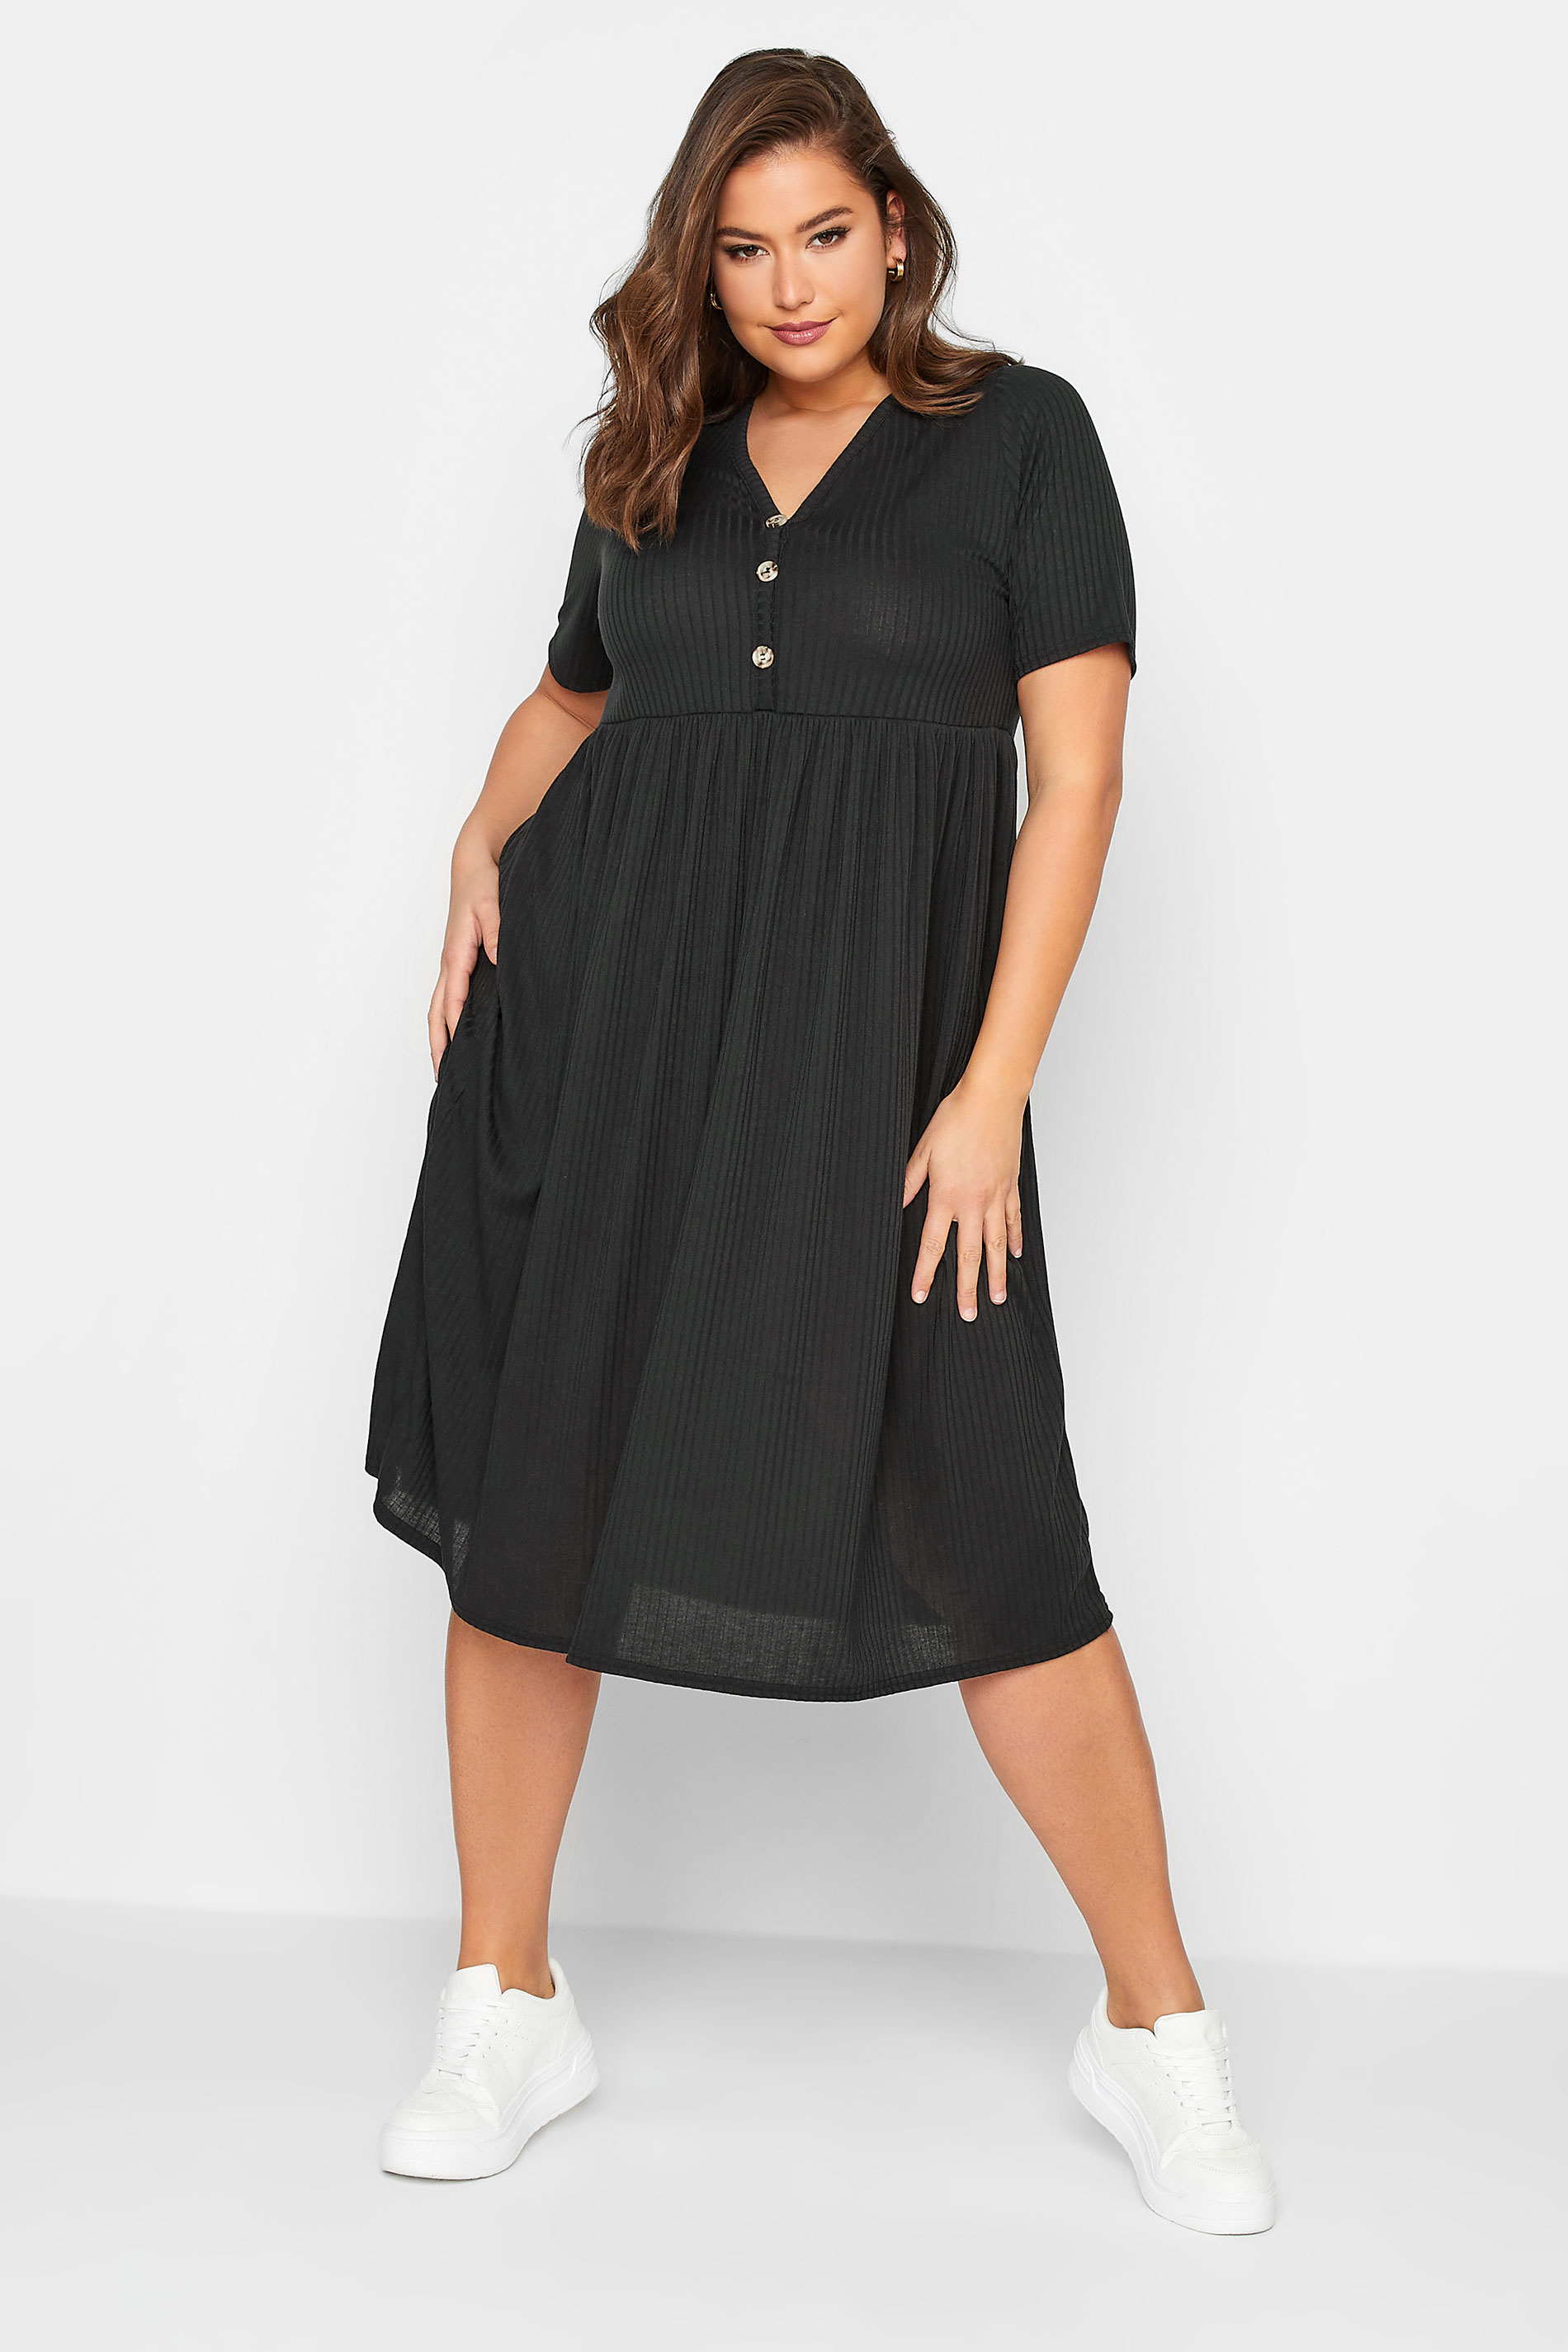 LIMITED COLLECTION Plus Size Black Ribbed Peplum Midi Dress | Yours Clothing 1